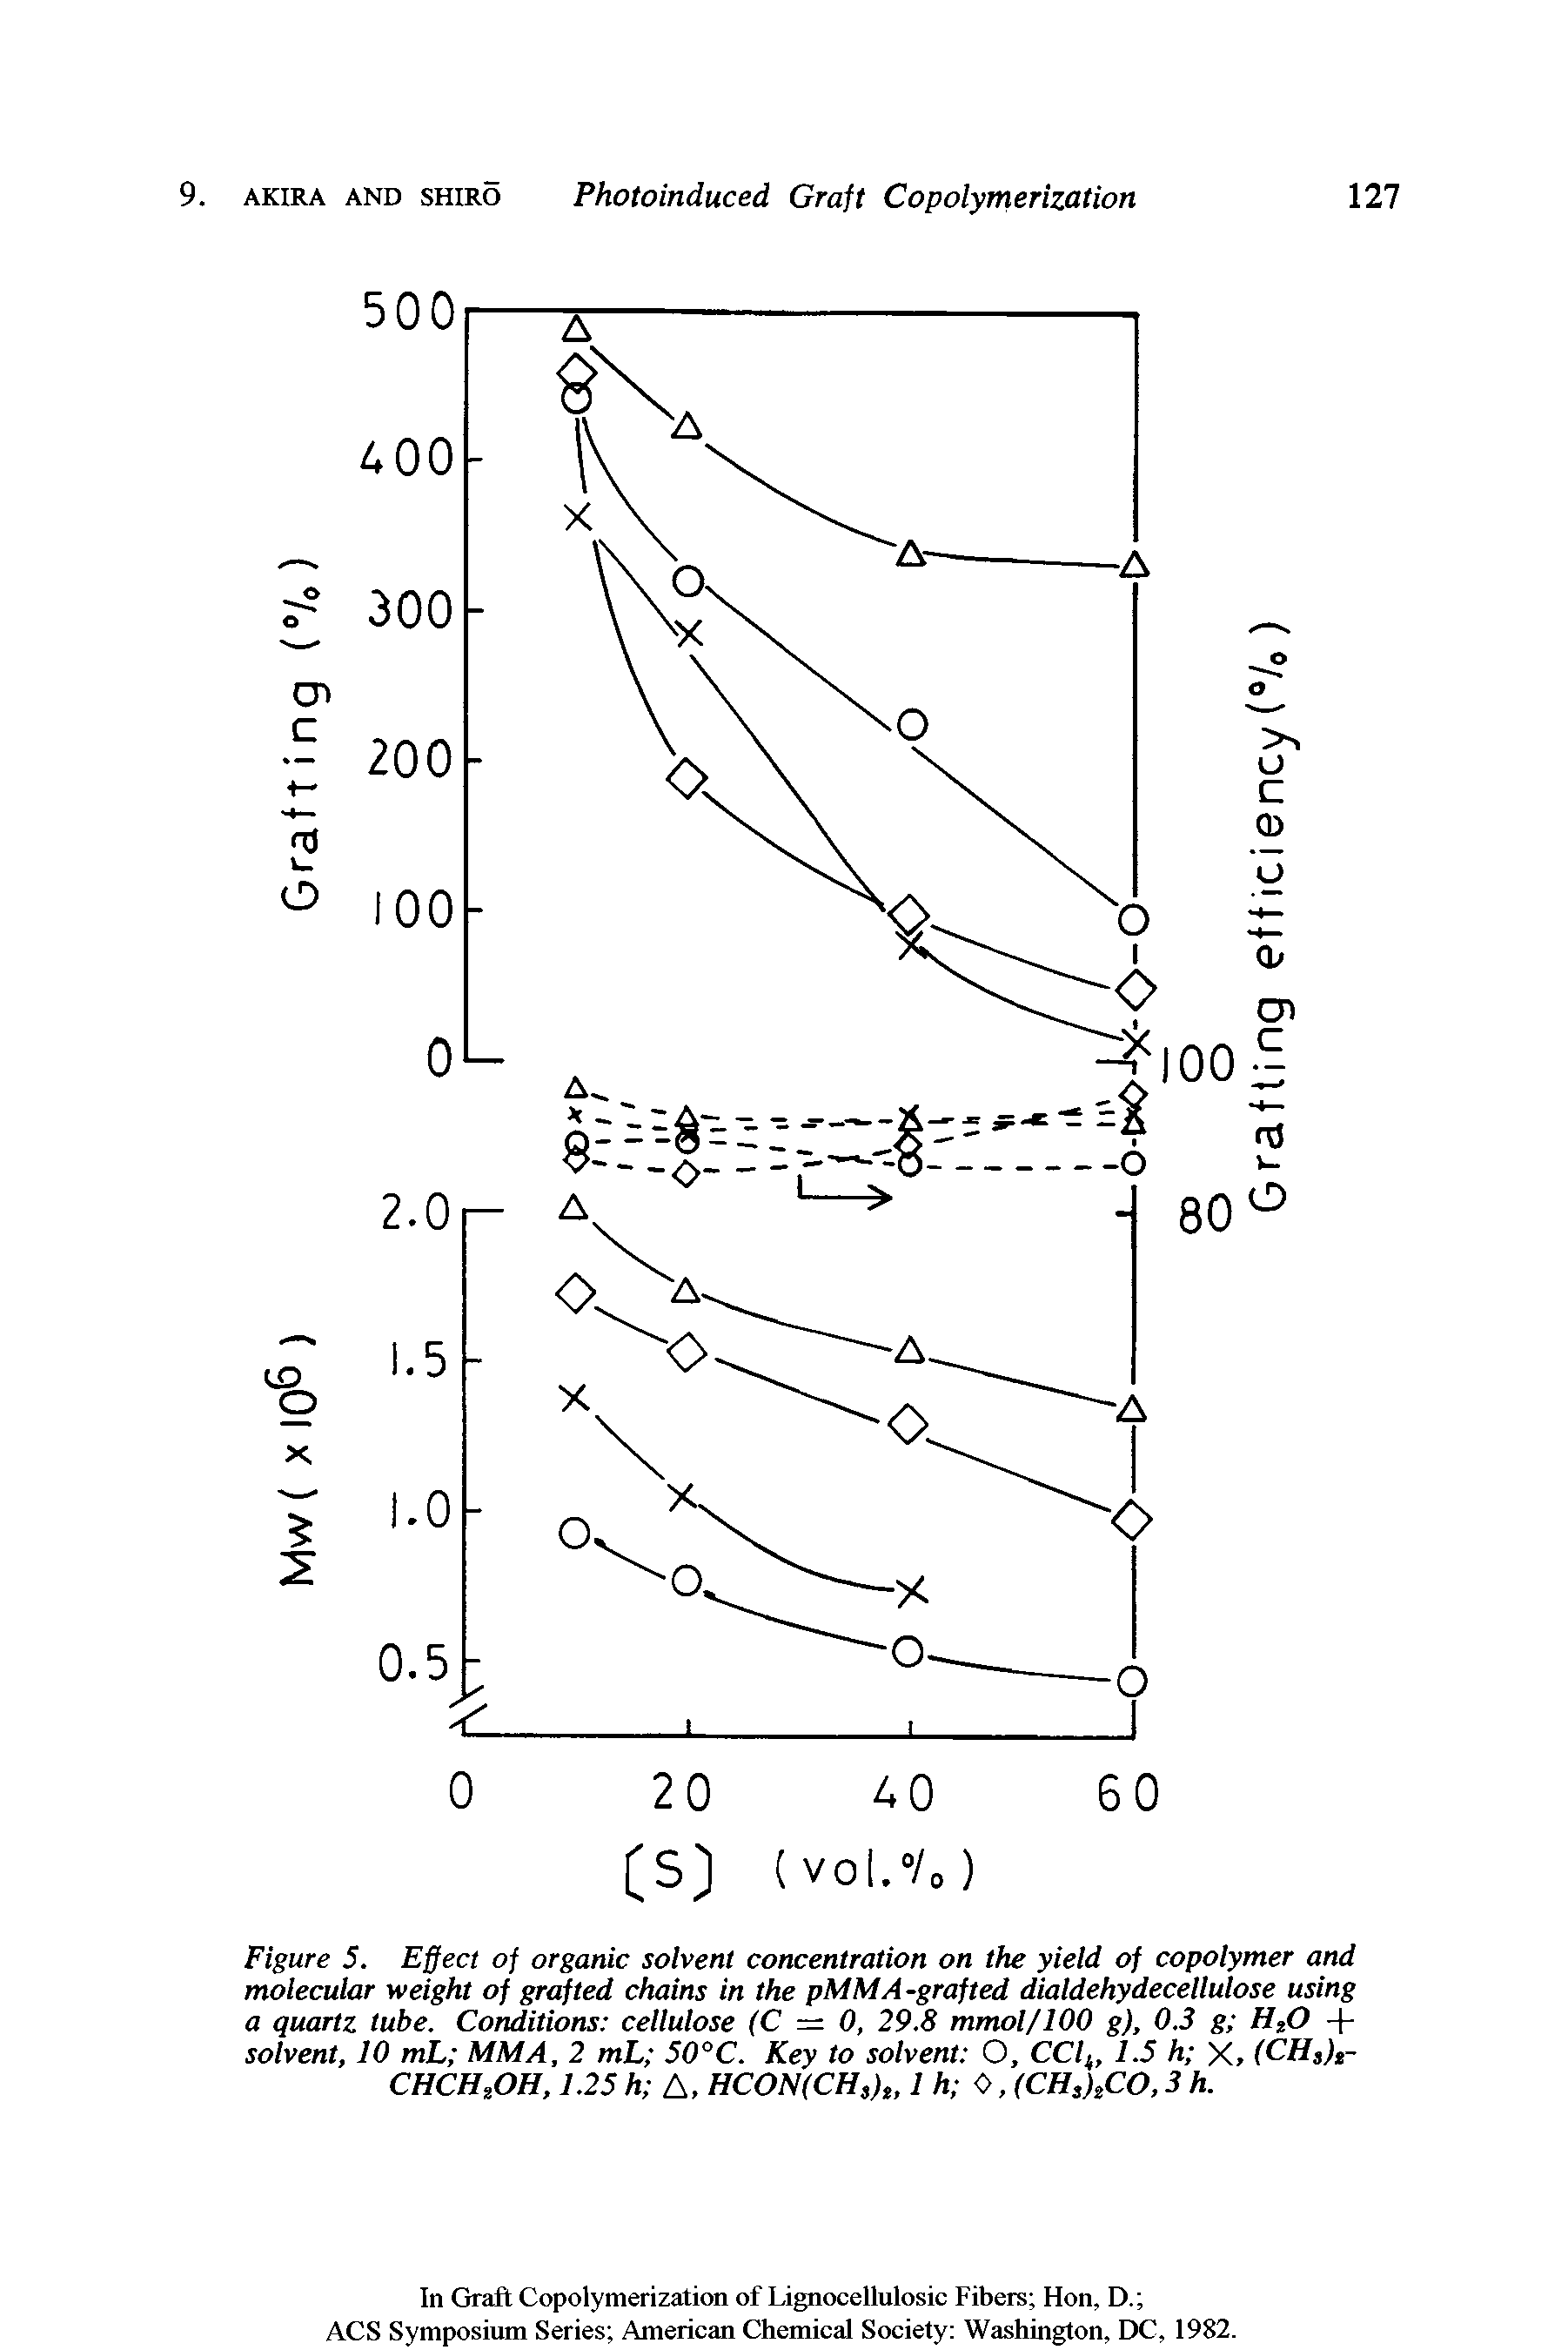 Figure 5. Effect of organic solvent concentration on the yield of copolymer and molecular weight of grafted chains in the pMMA-grafted dialdehydecellulose using a quartz lube. Conditions cellulose (C — 0, 29.8 mmol/100 g), 0.3 g H,0 + solvent, 10 mL MMA, 2 mL 50°C. Key to solvent O, CC/(, 1.5 h X, (CHs)t-CHCH%OH, 1.25 h A, HCON(CHs)t, 1 h <>, (CHs)2CO, 3 h.